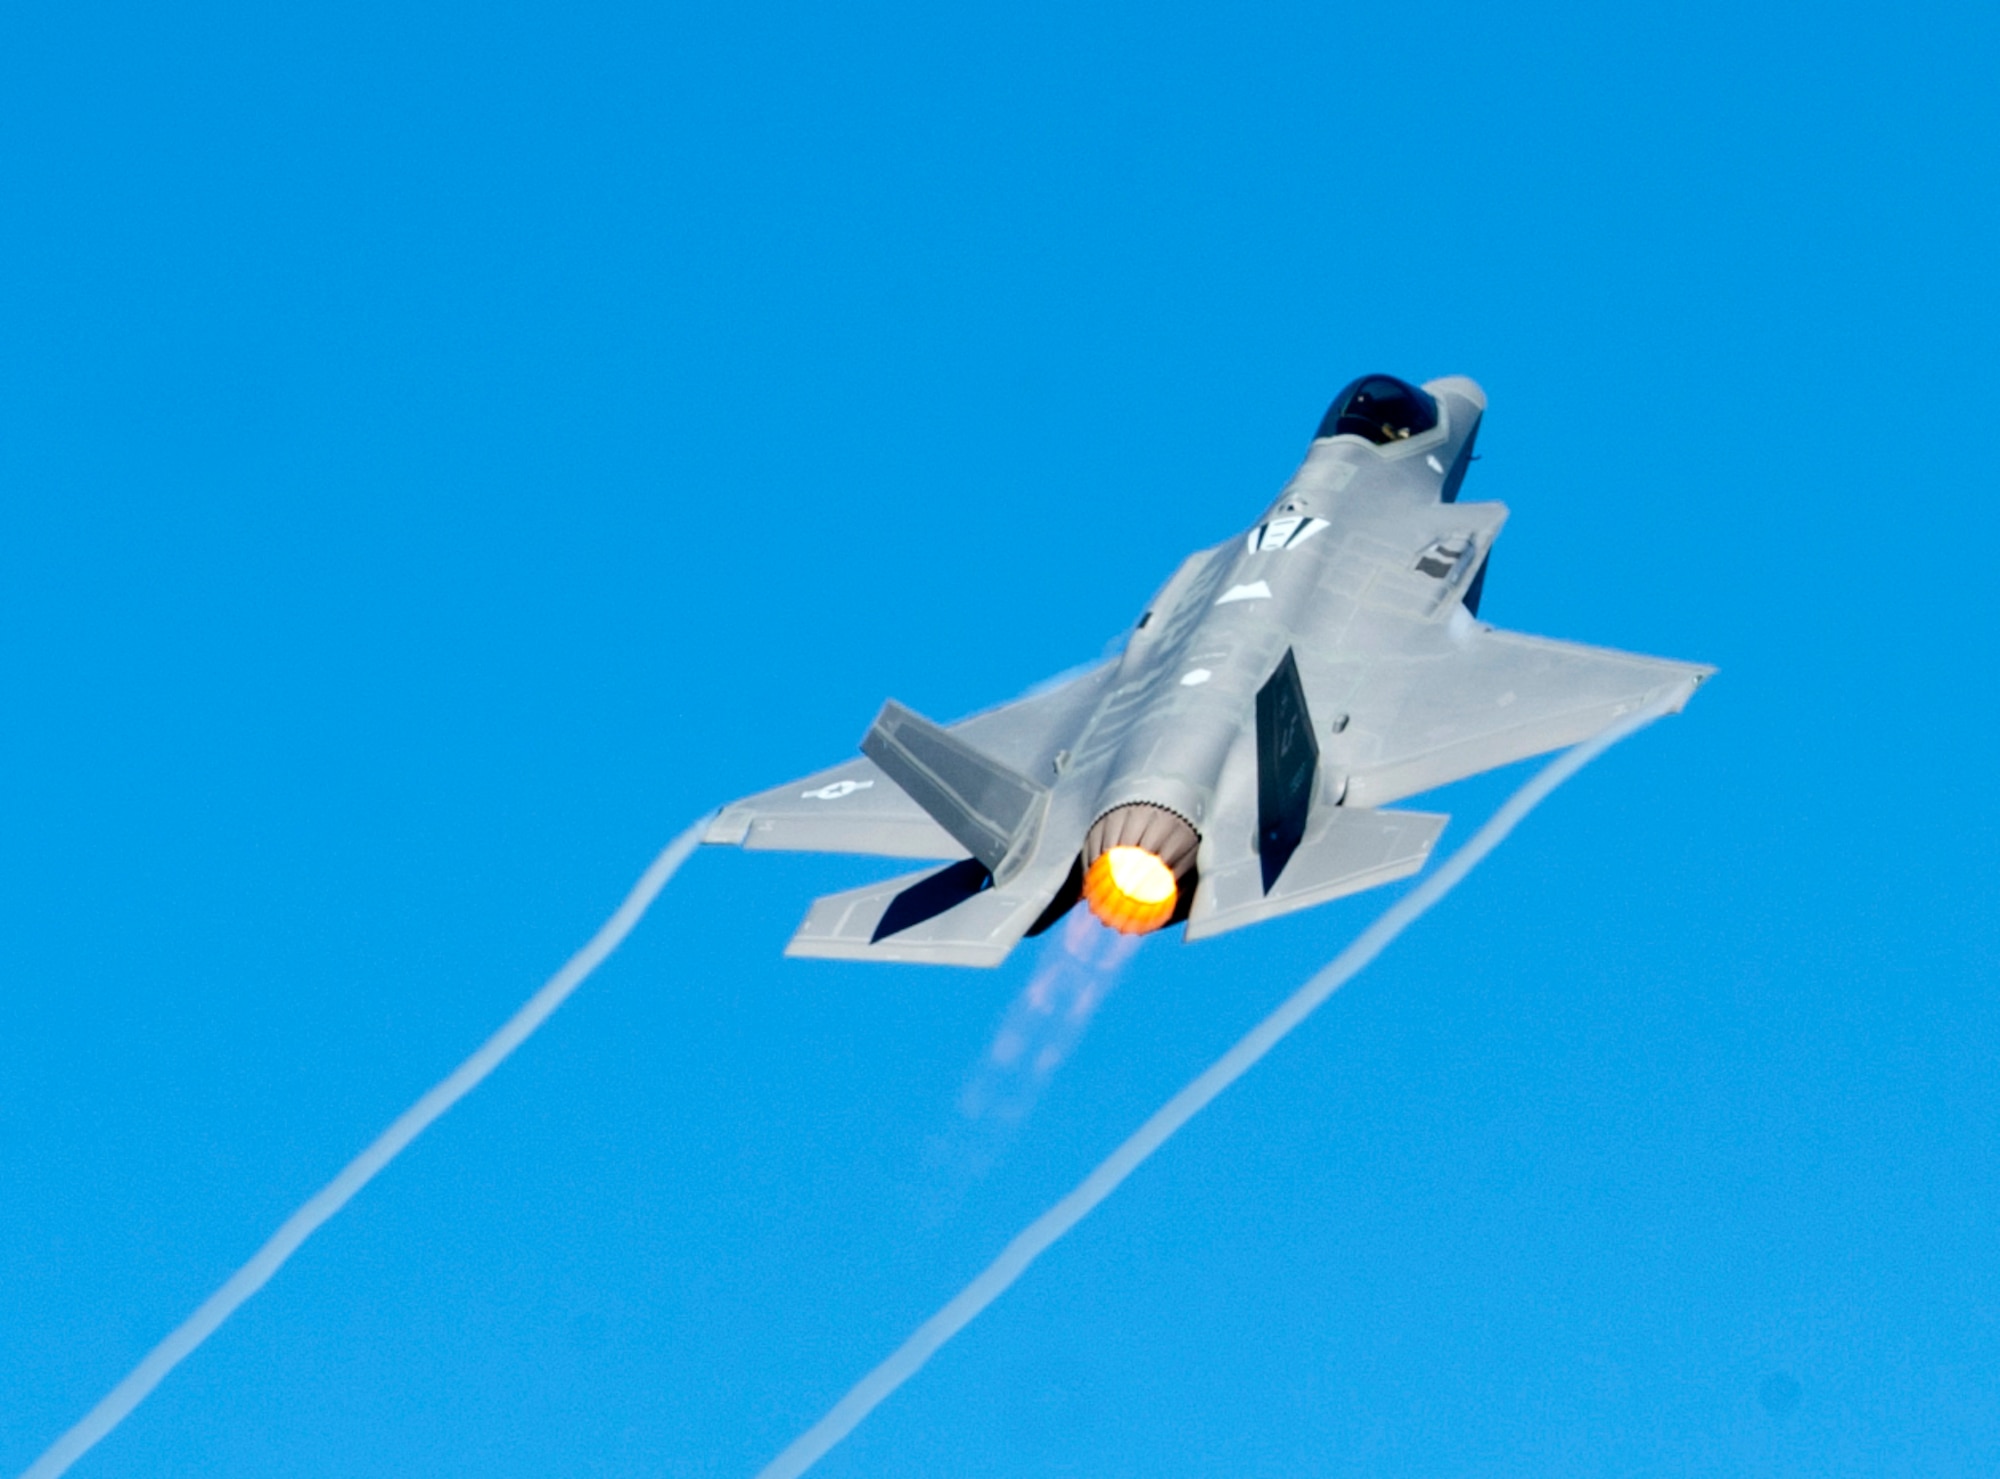 An F-35 Lightning II demonstration aircraft takes off during the AirPower over Hampton Roads Open House at Joint Base Langley-Eustis, Va., April 24, 2016. The aircraft performed alongside and F-22 Raptor and a P-51 Mustang as part of the Heritage Flight Program, which showcases the evolution of airpower by flying today's state-of-the-art fighter aircraft in close formation with vintage fighter aircraft. (U.S. Air Force photo/Senior Airman R. Alex Durbin) 
